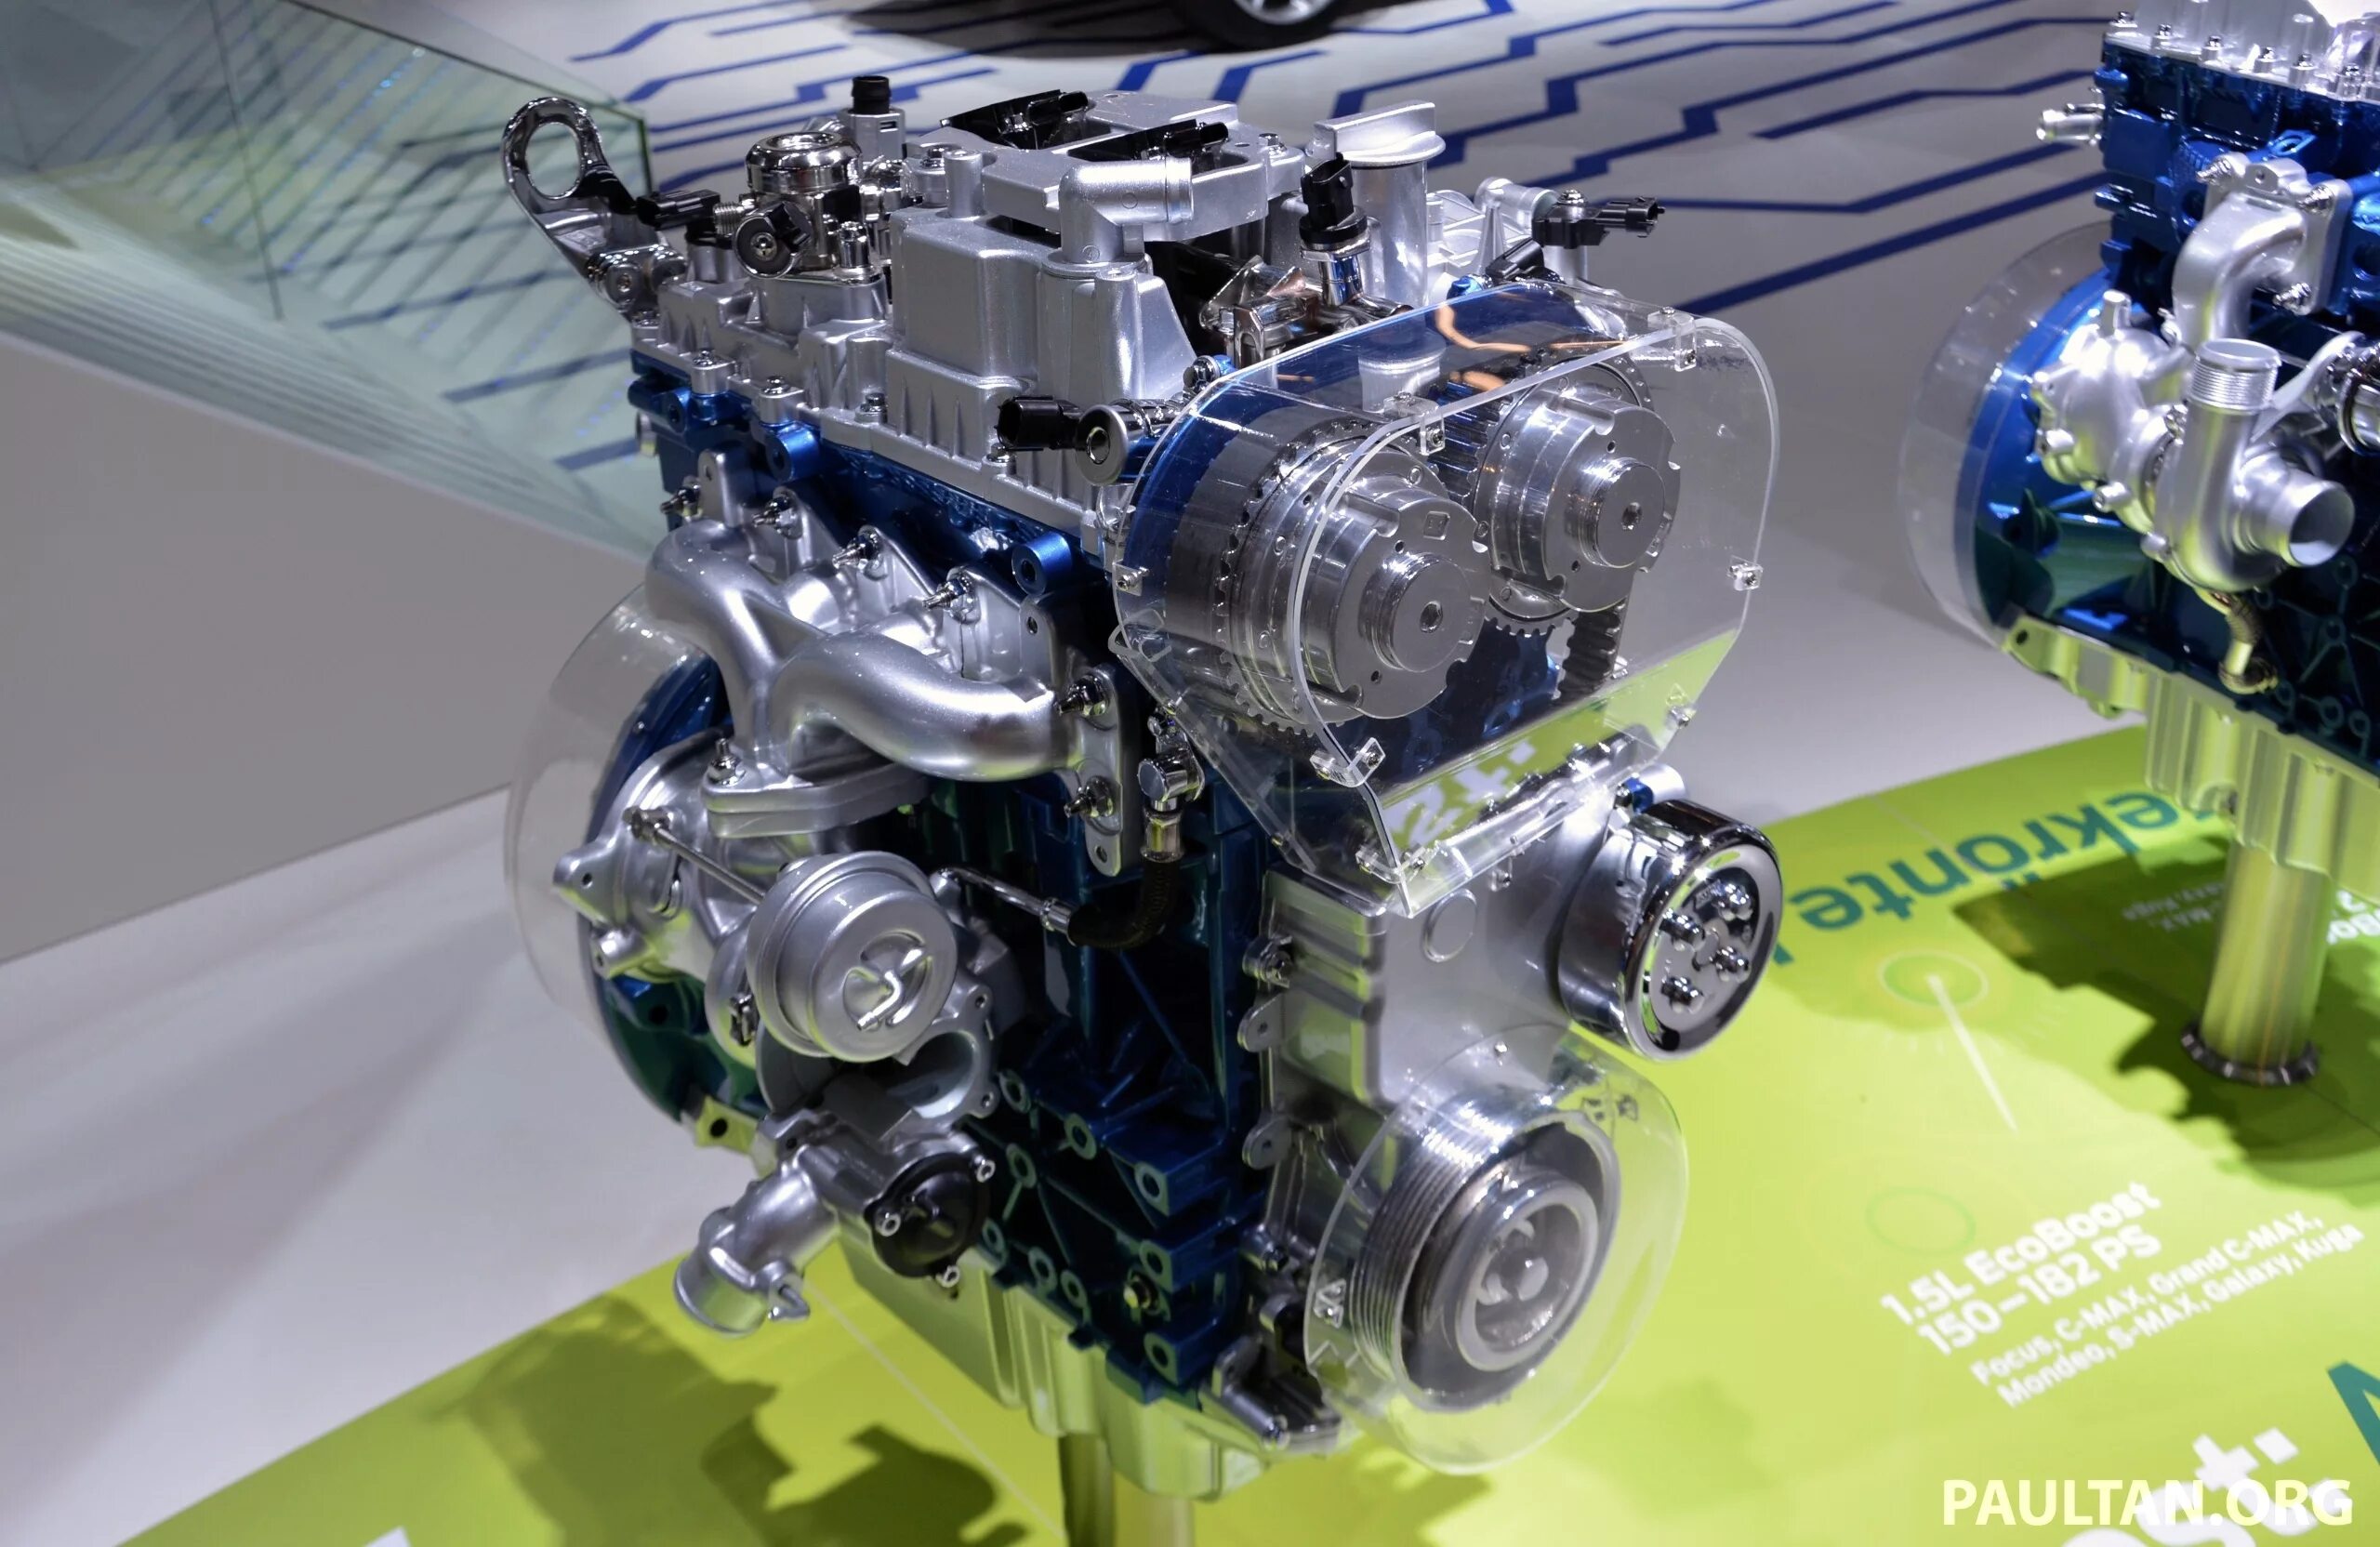 1,6 ECOBOOST Ford. Ford 1.5 ECOBOOST. Двигатель Форд 1.6 экобуст 150. Двигатель Форд экобуст 1.5 150 л.с.